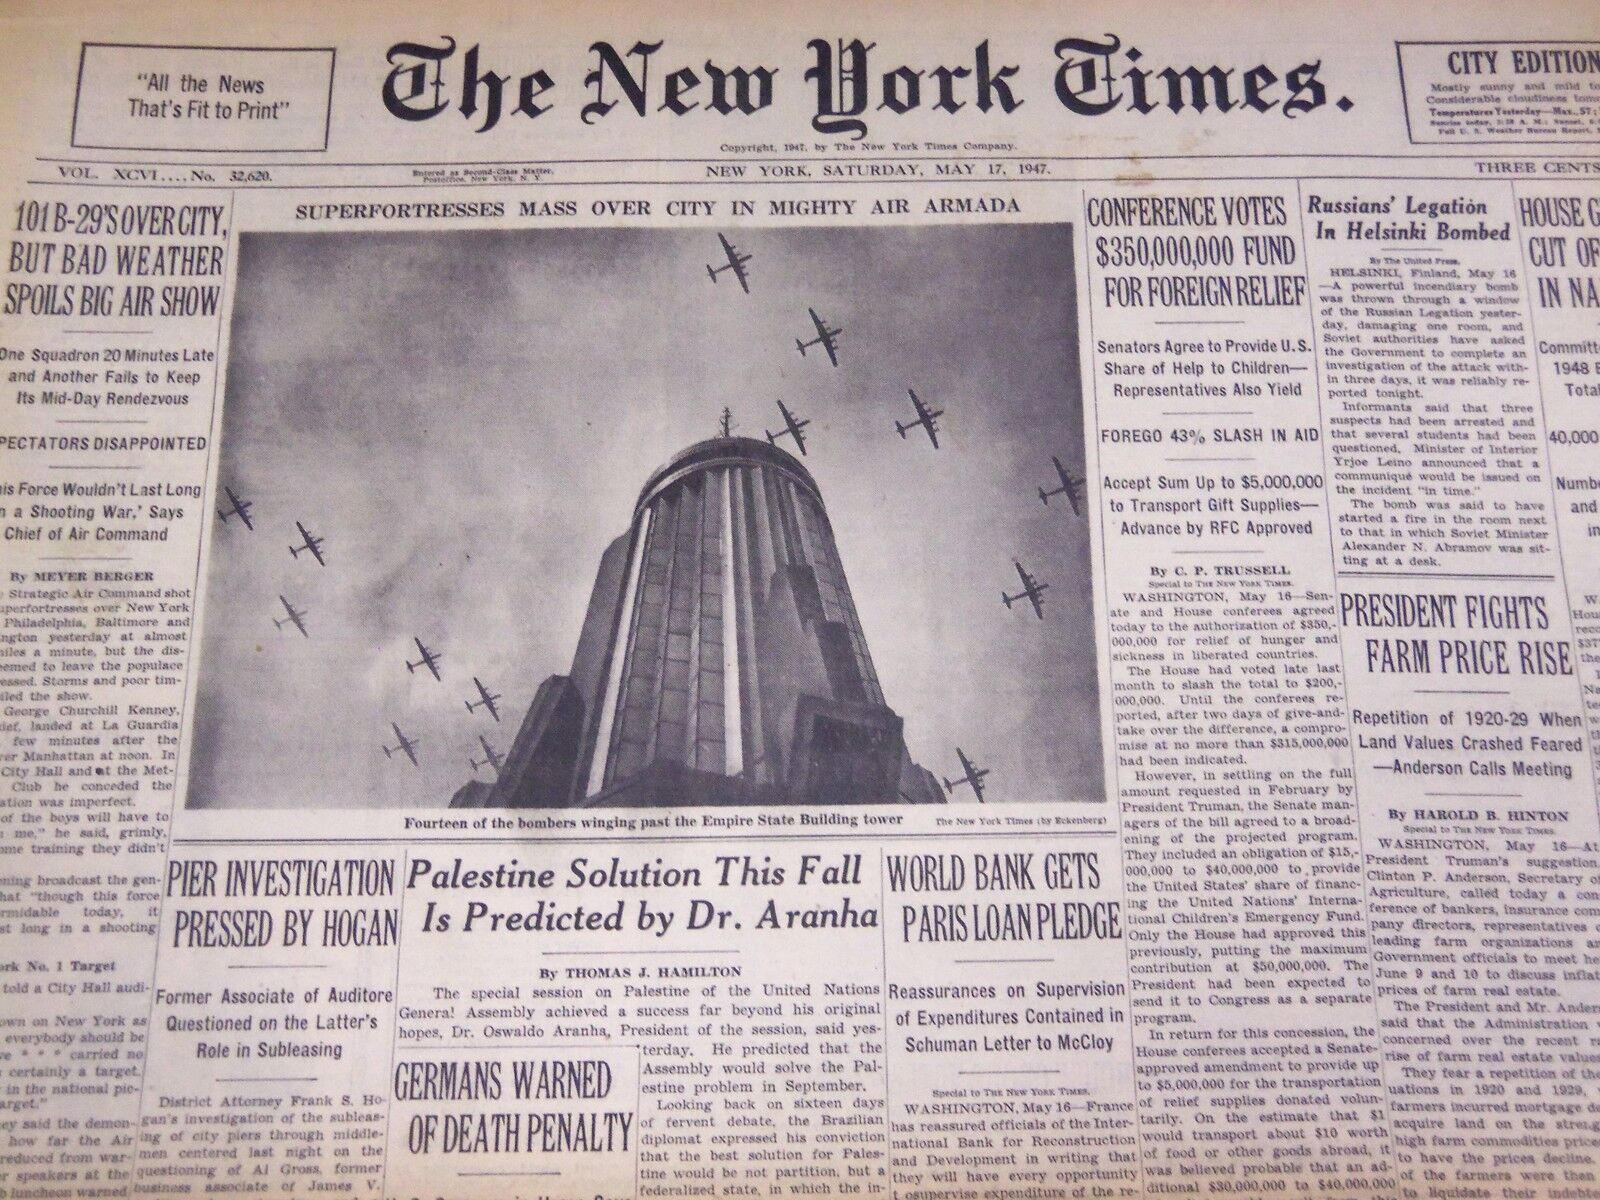 1947 MAY 17 NEW YORK TIMES PALESTINE SOLUTION THIS FALL SAYS ARANHA - NT 1418